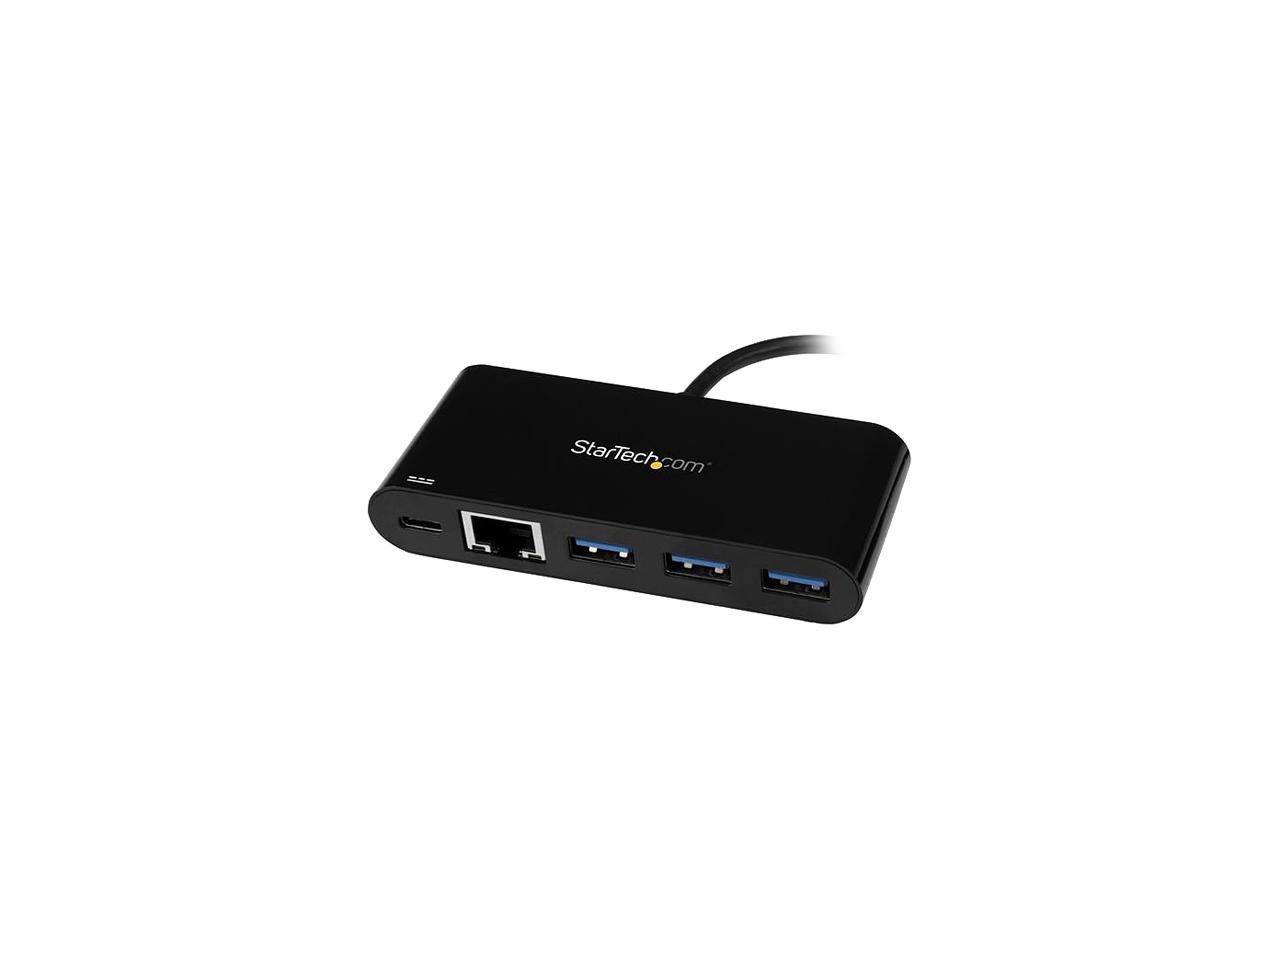 StarTech HB30C3AGEPD 3 Port USB C Hub w/ GbE & PD 2.0 - USB-C to 2 x USB-A - USB 3.0 Hub - USB Port Expander - USB Port Hub w/ GbE & Power Delivery - image 2 of 5